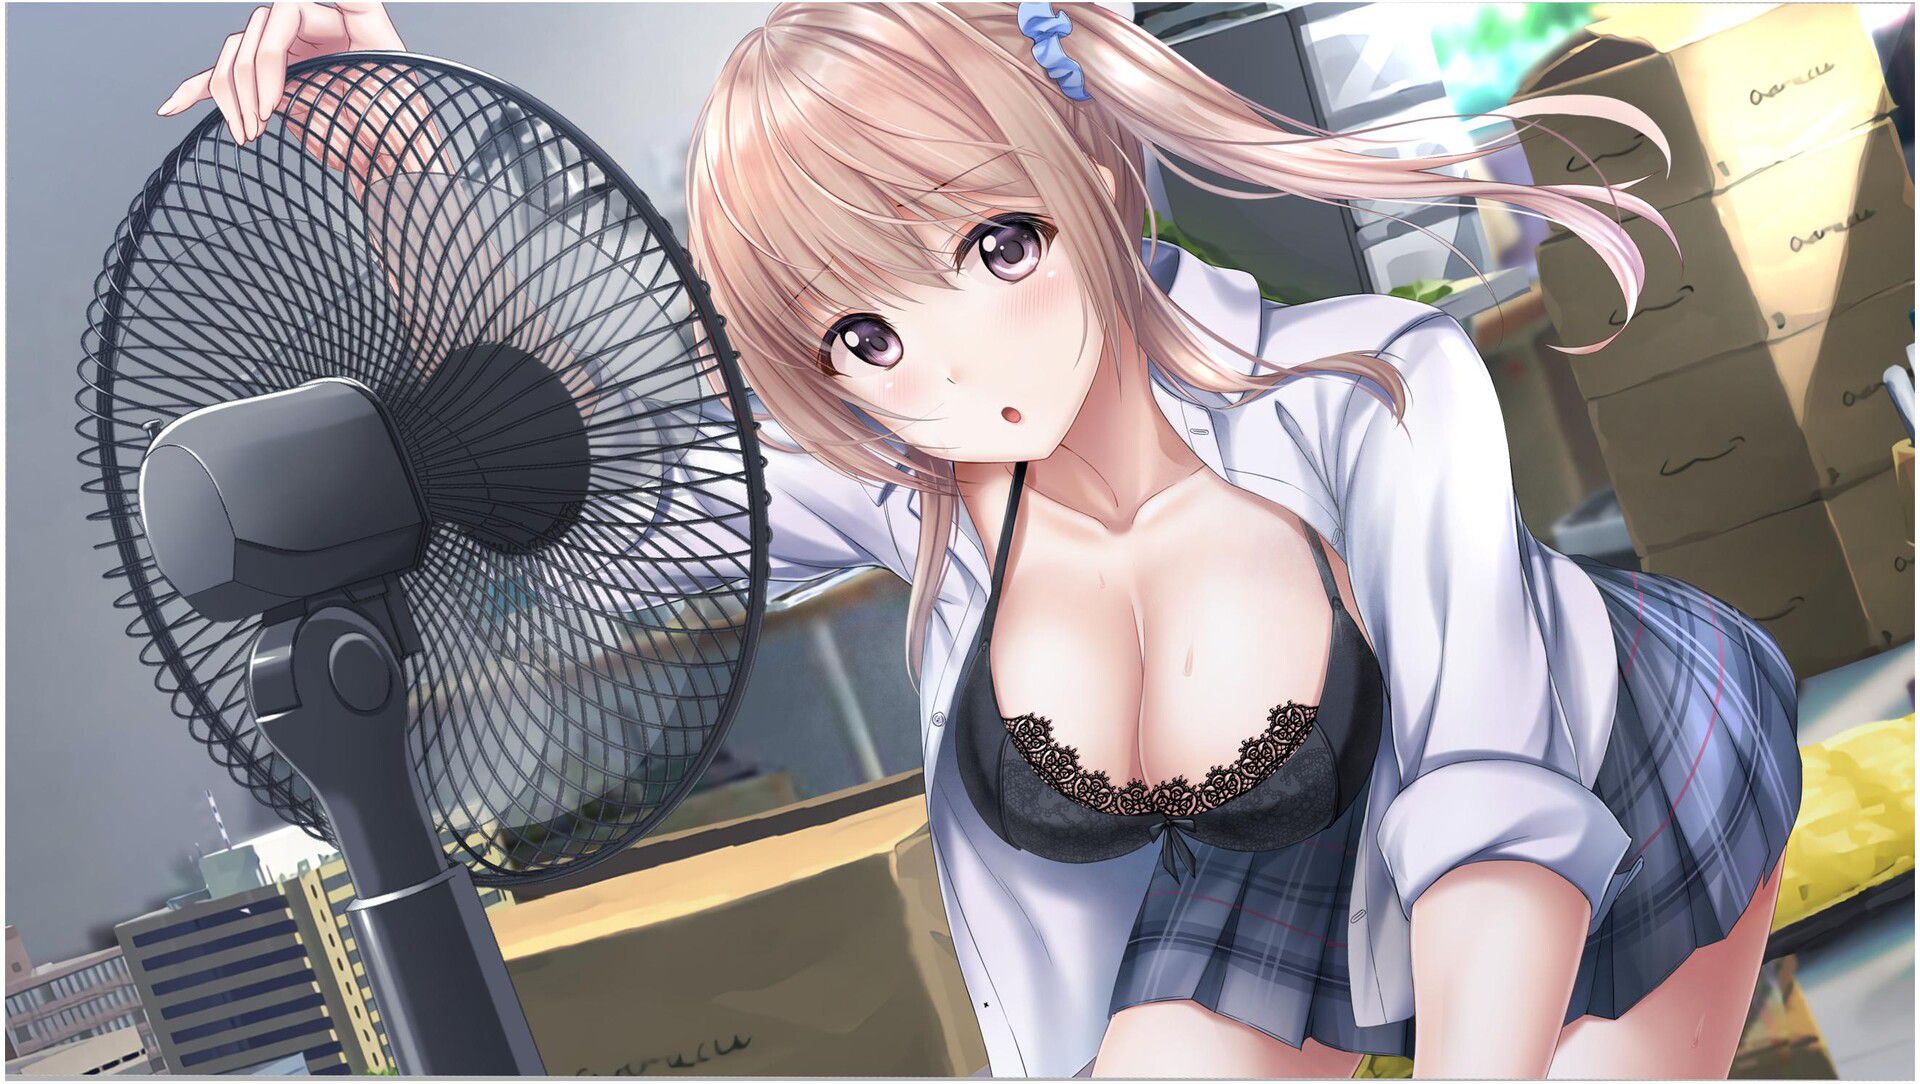 PS4 / switch version [Aikis 2] erotic event CG such as girl's skirt raise and swimsuit 11